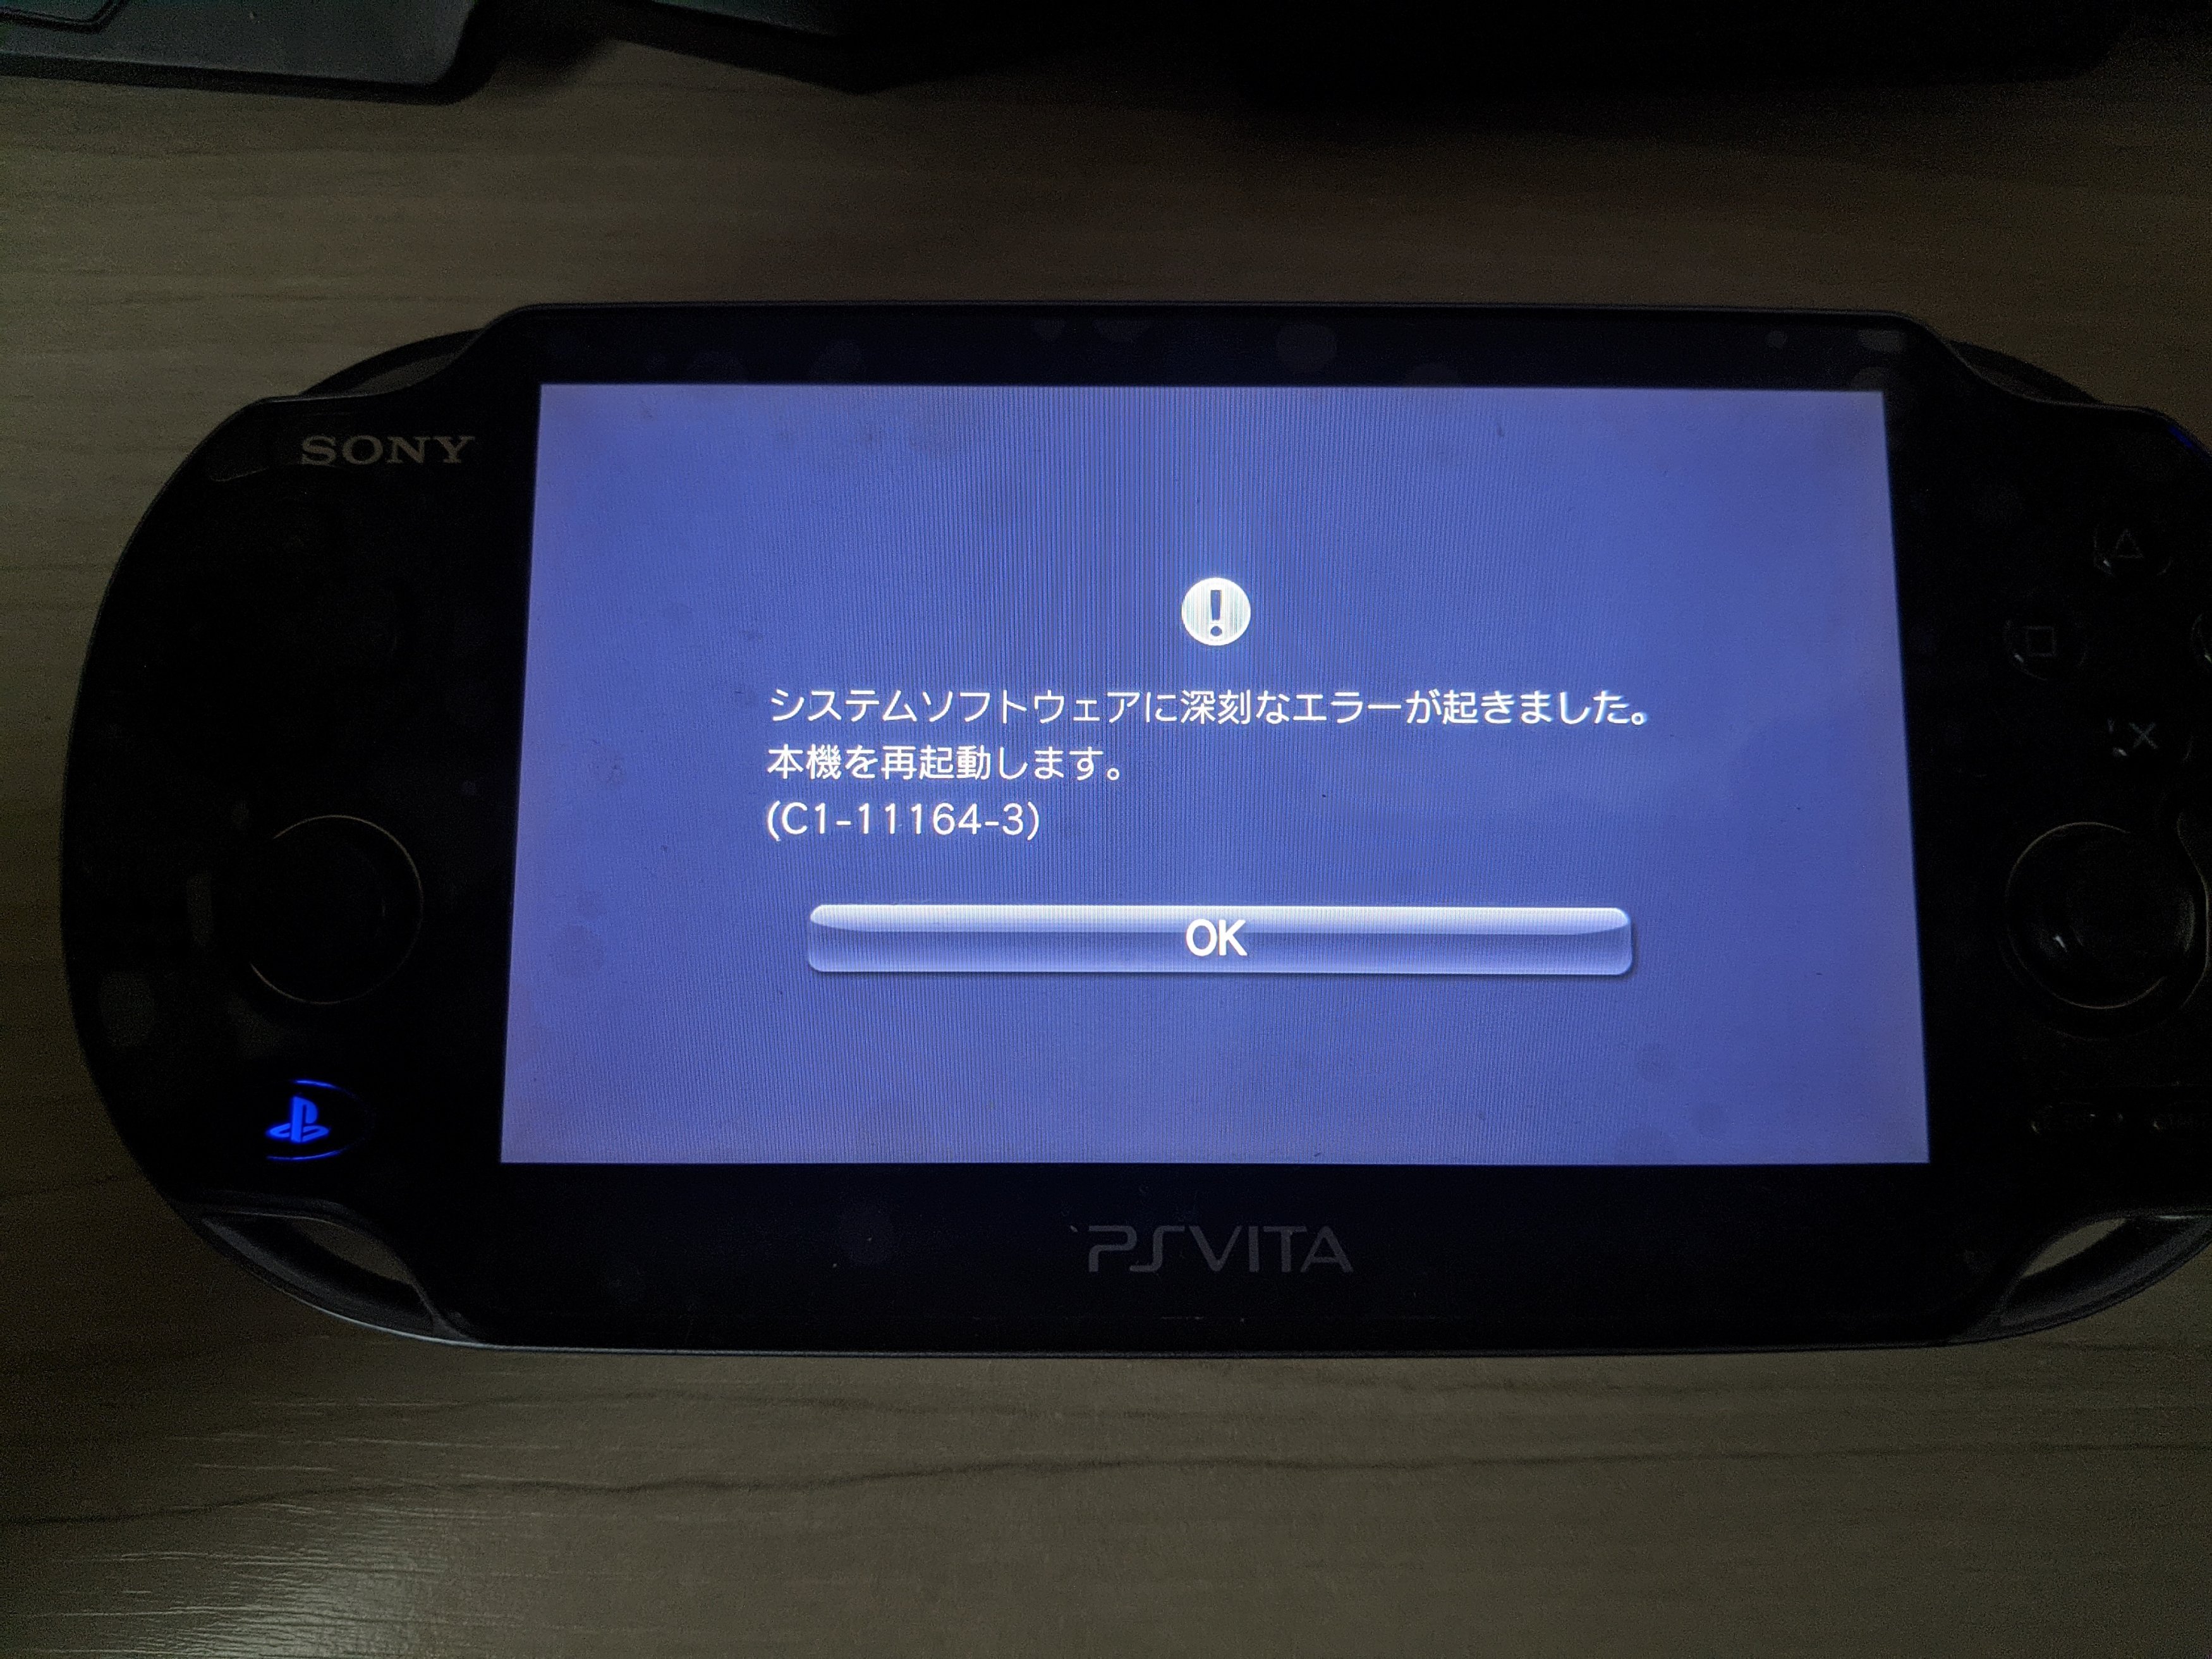 Error C1-11164-3 - Dead end for this vita? | GBAtemp.net - The Independent  Video Game Community